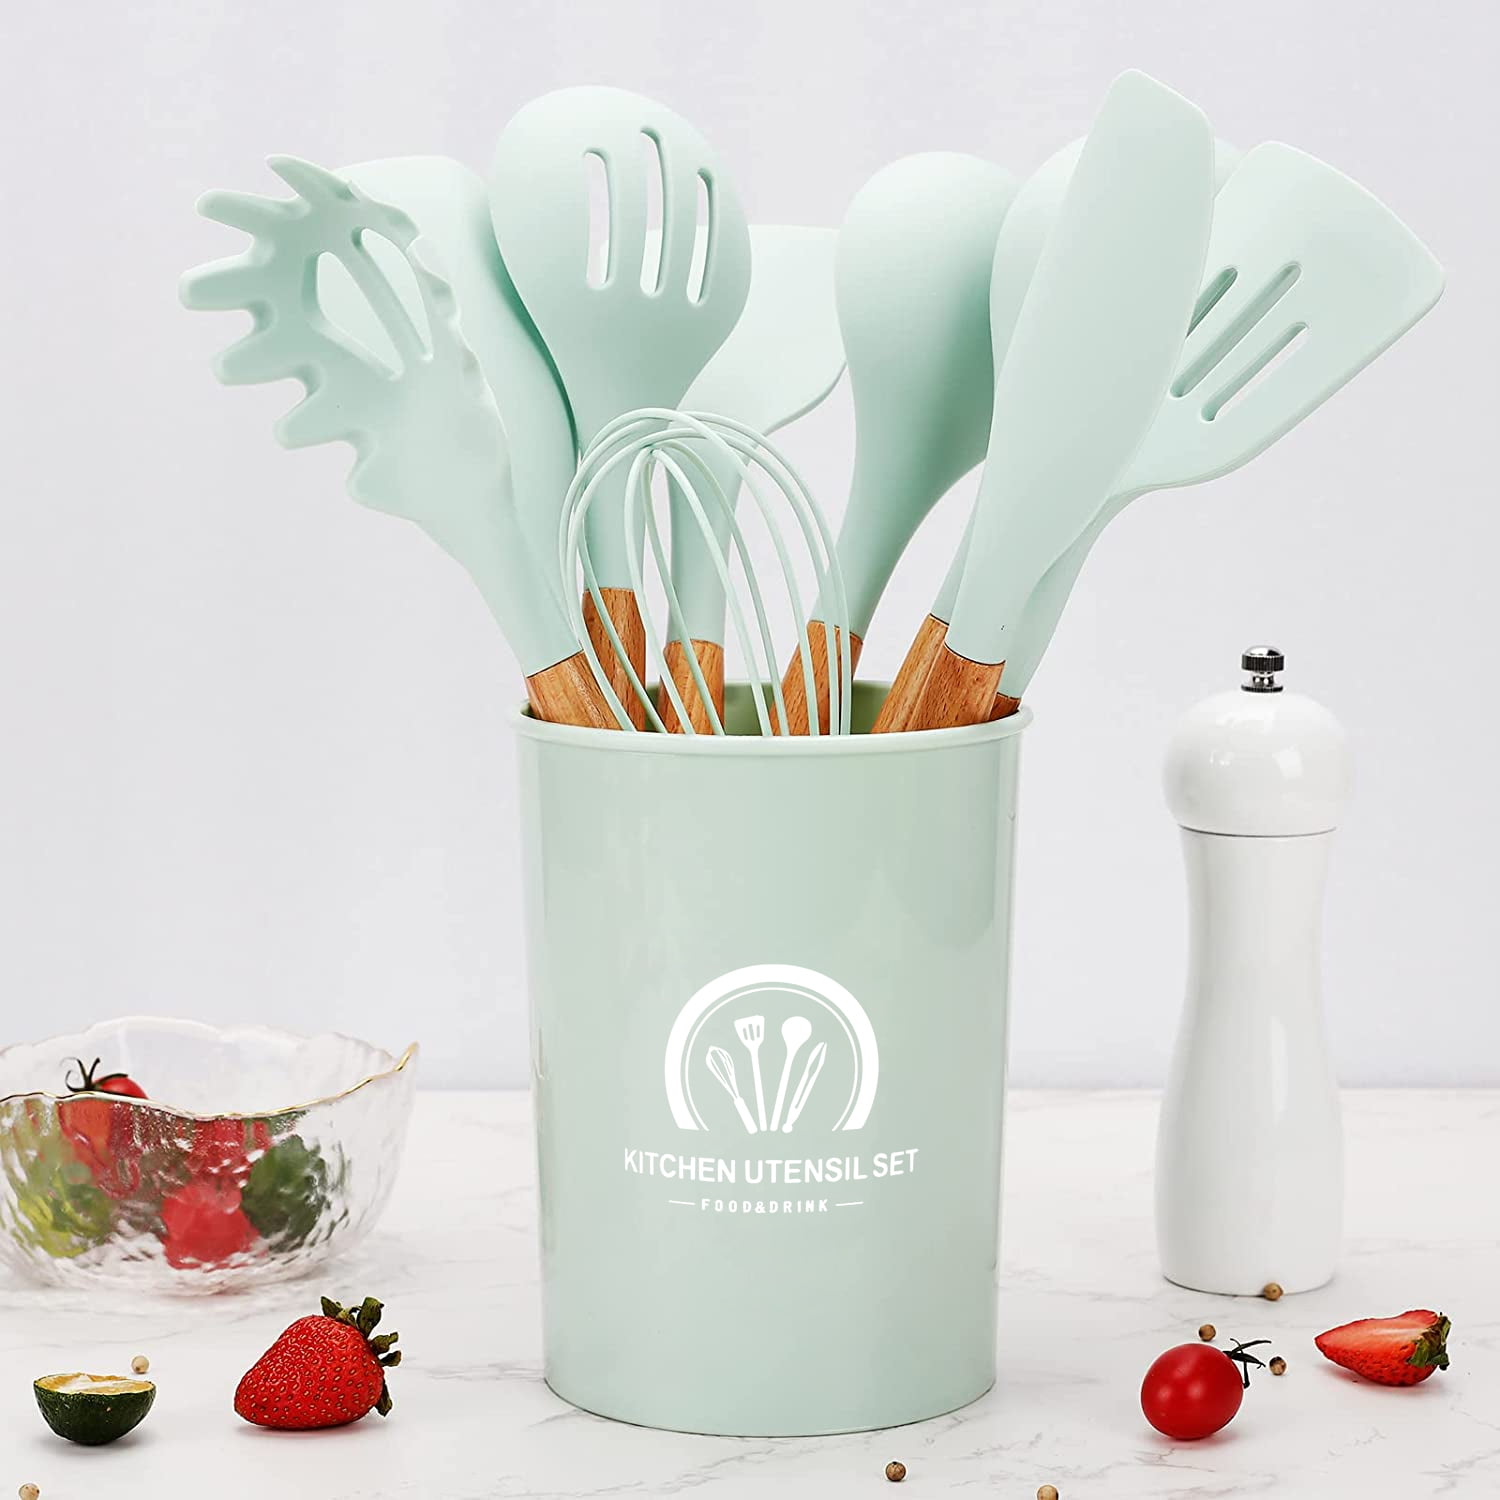 Silicone Cooking Utensils Set - 446°F Heat Resistant Silicone Kitchen  Utensils for Cooking,Kitchen Utensil Spatula Set w Wooden Handles and Holder,  BPA FREE Gad…